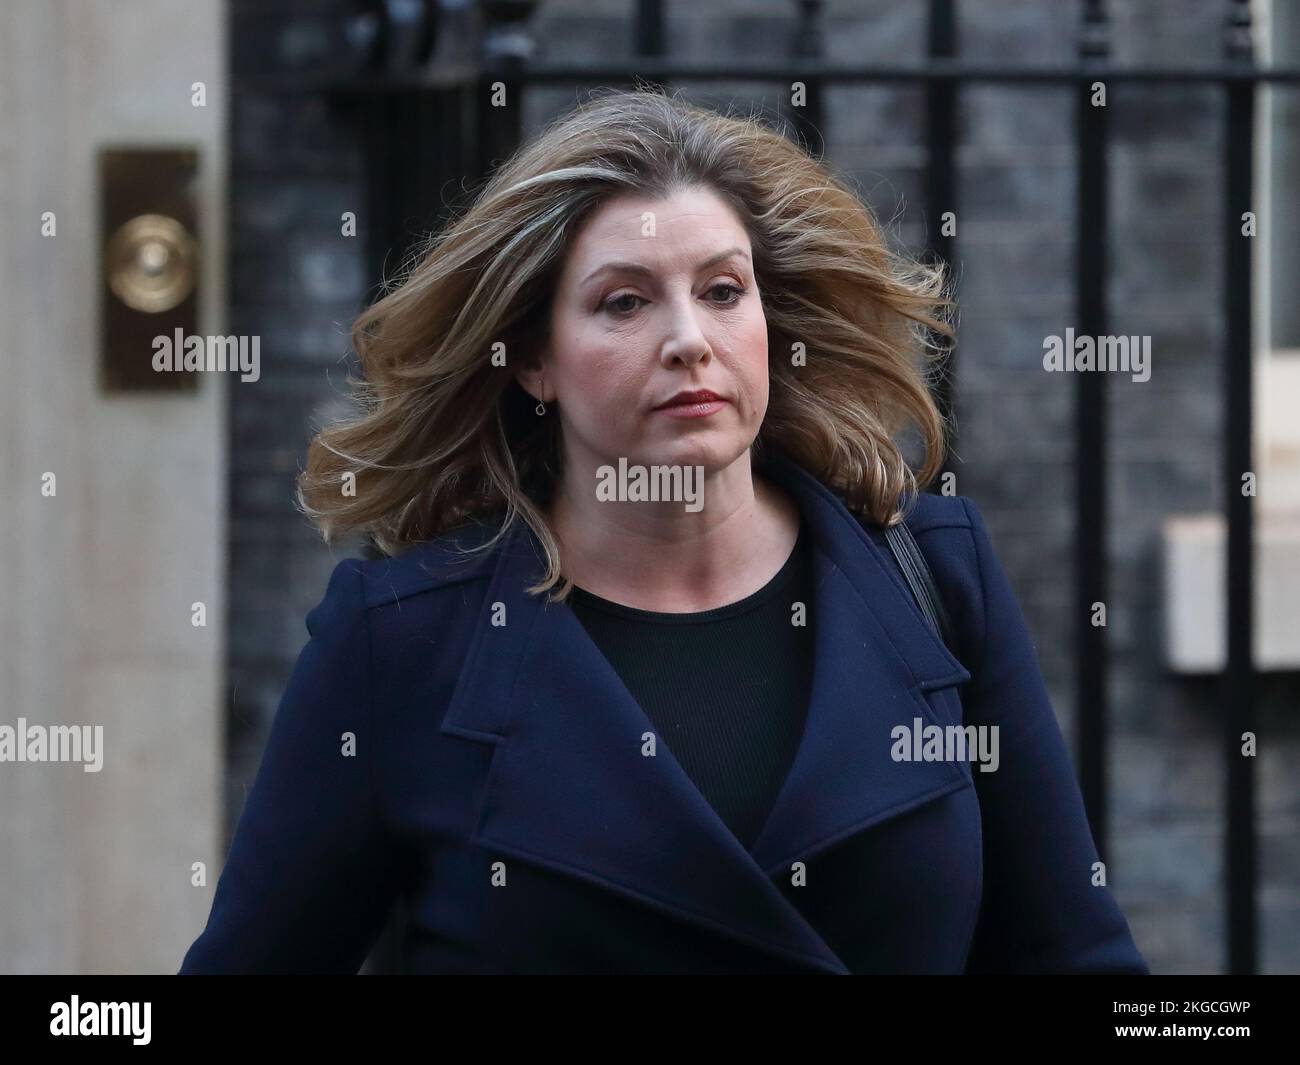 Downing Street, London, UK. 22nd November 2022. Leader of the House of Commons Penny Mordaunt leaves after the Cabinet Meeting at No 10 Downing Street. Stock Photo